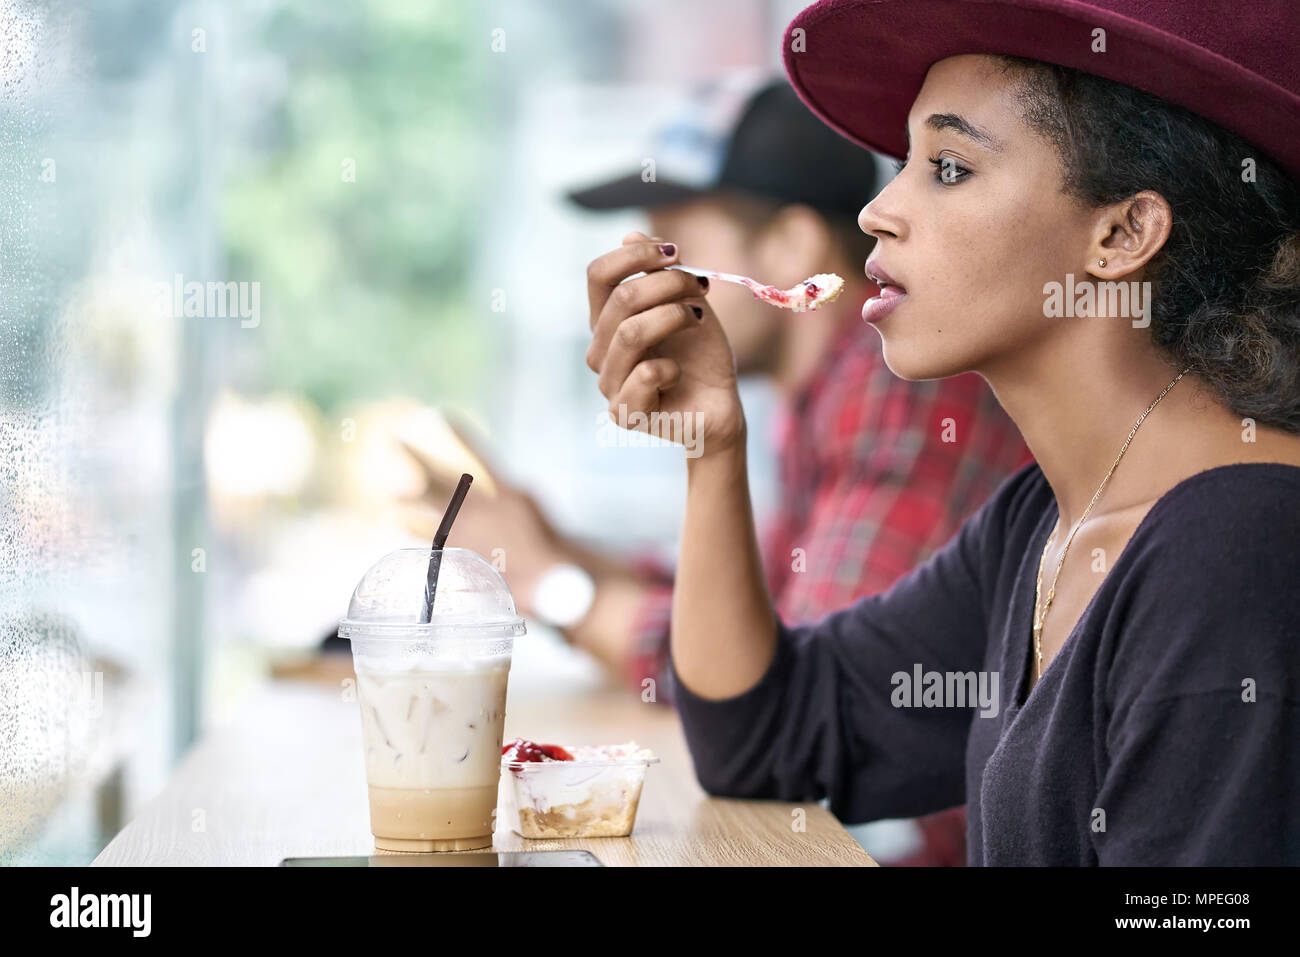 Dating of interracial couple Stock Photo